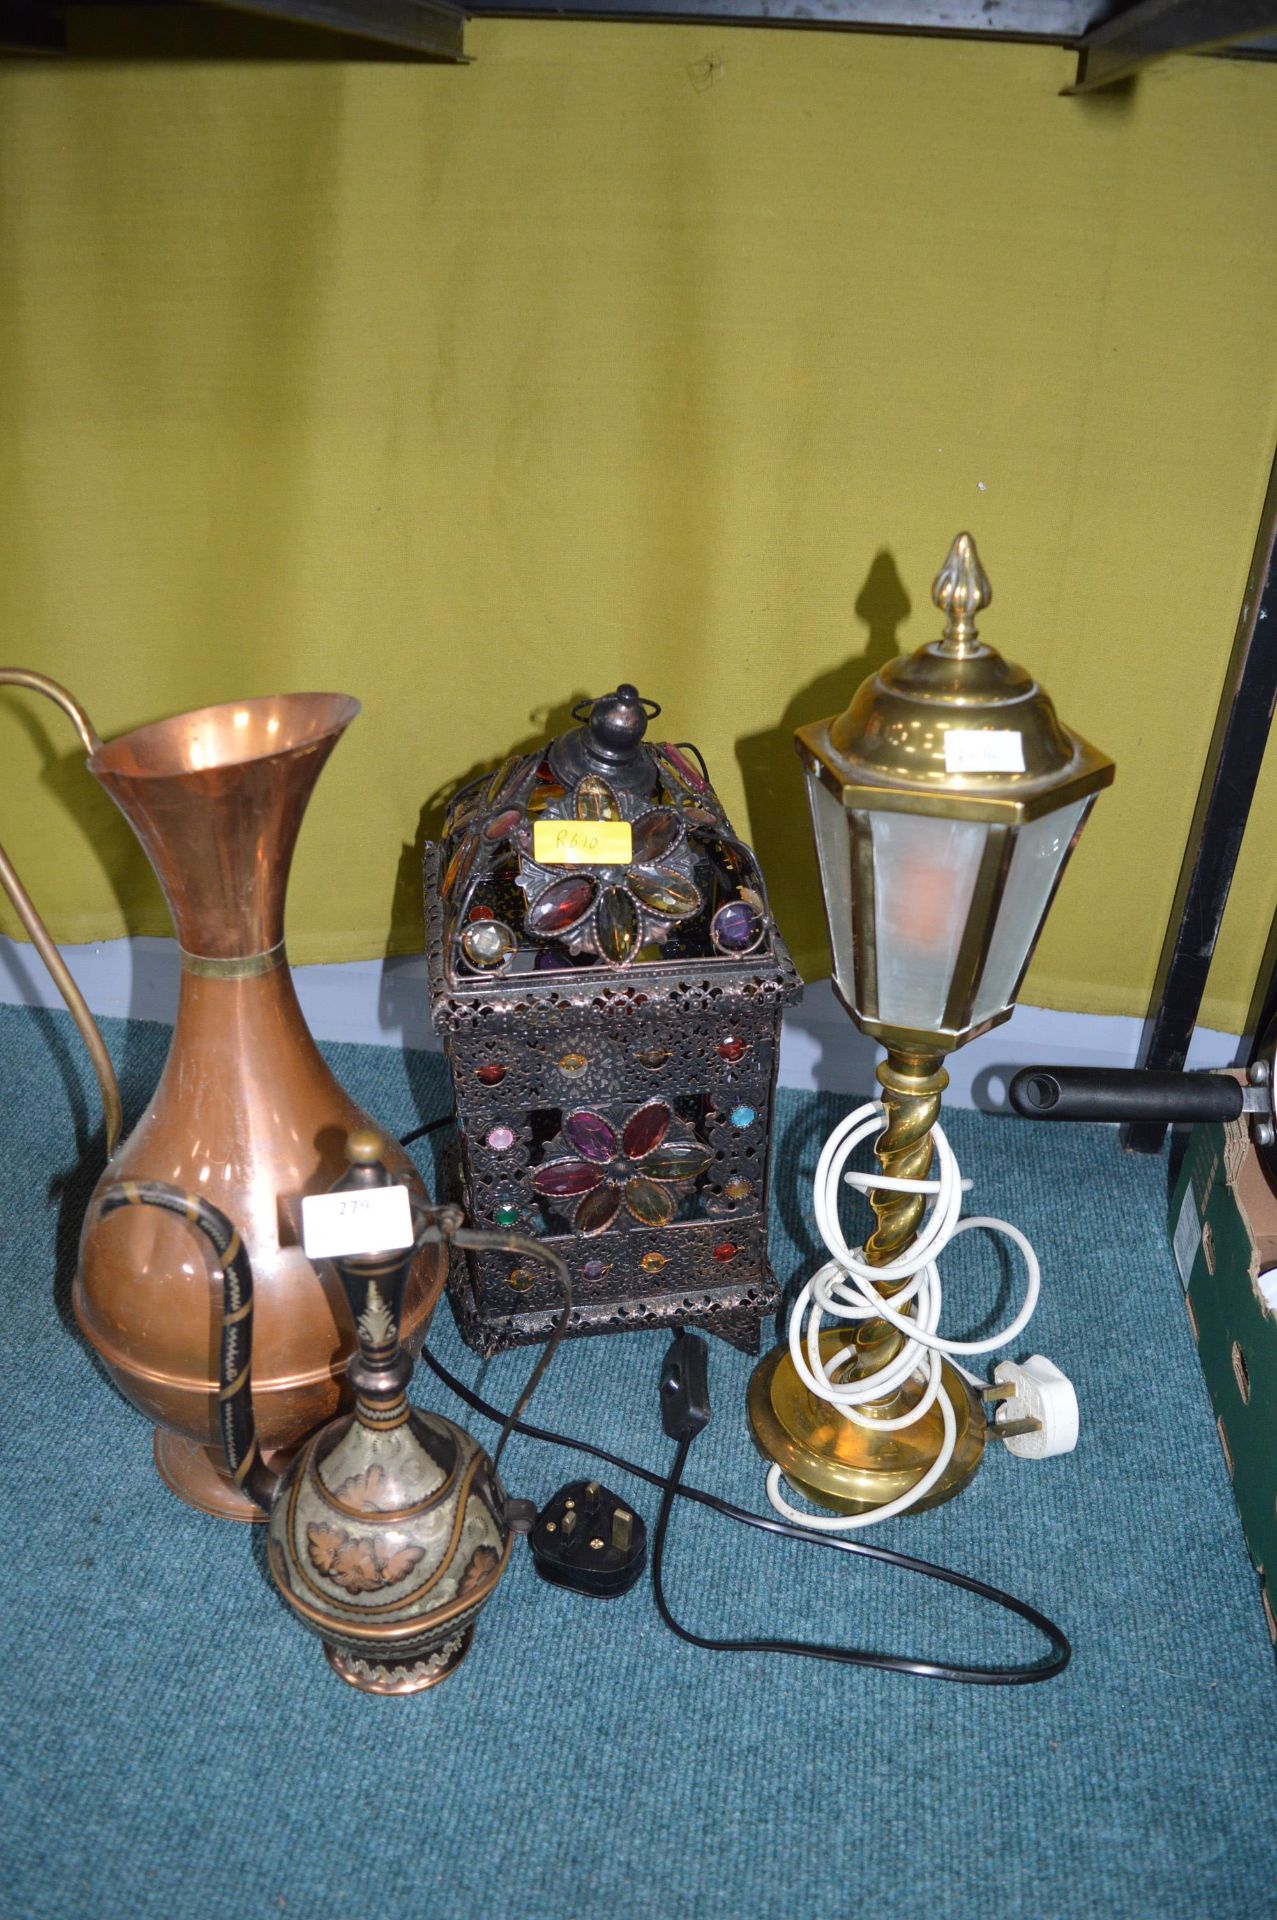 Two Lamps and Two Copper Jugs